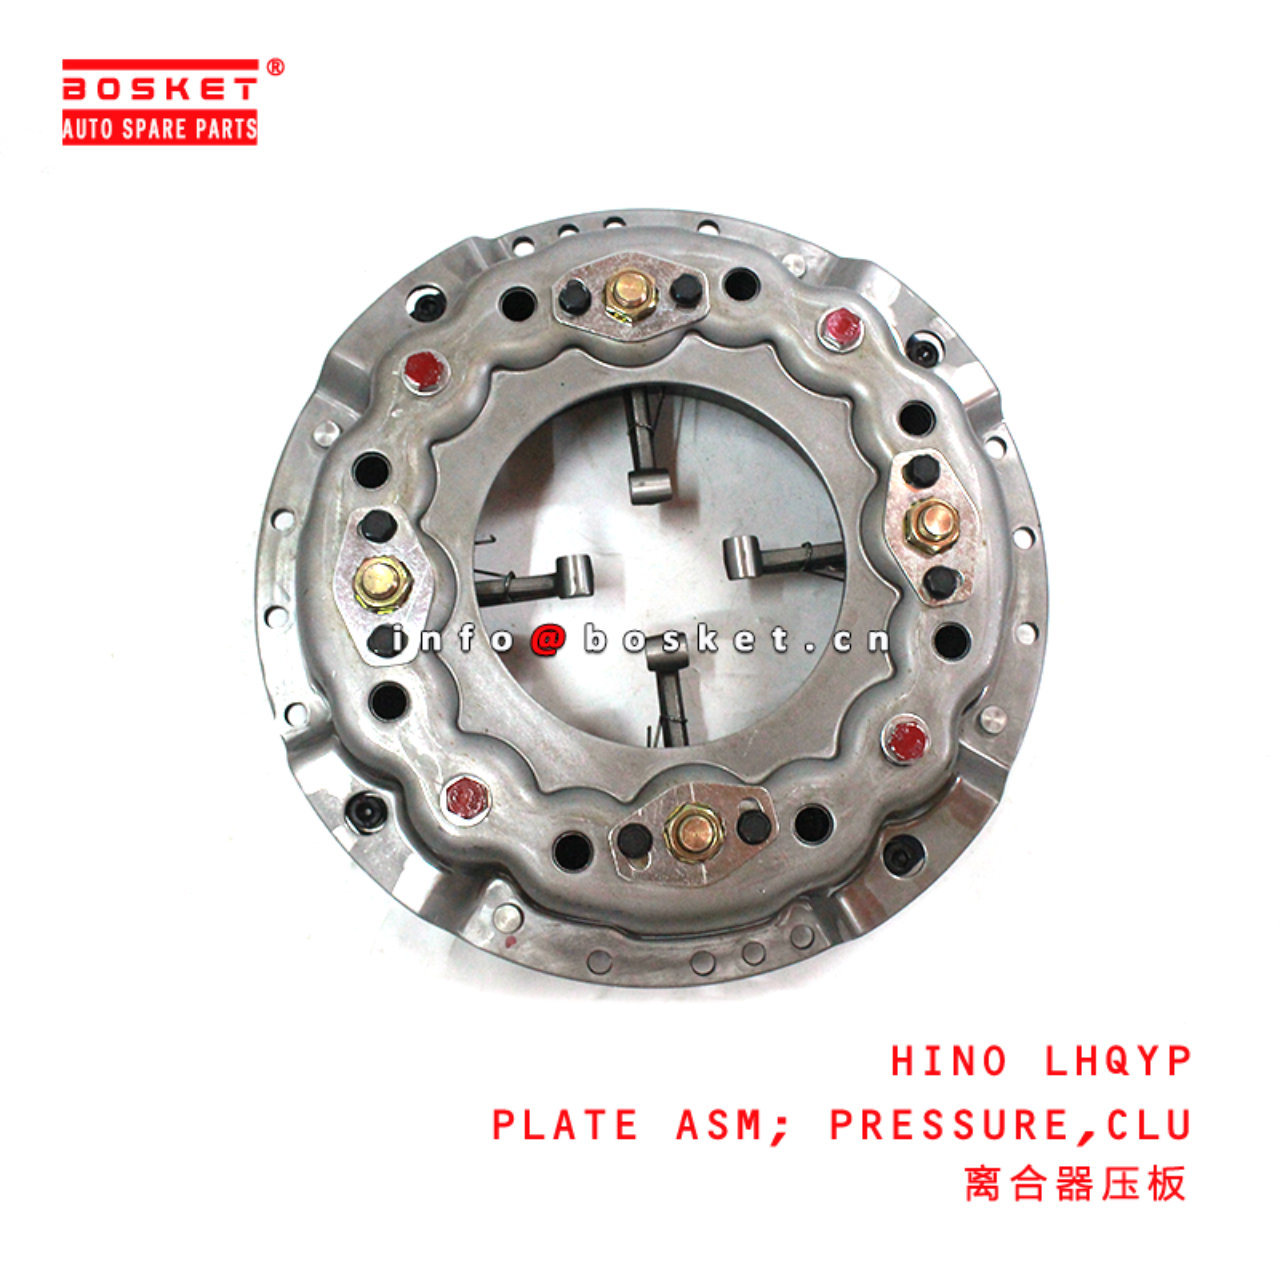 HINO Clutch Pressure Plate Assembly Suitable for ISUZU HINO